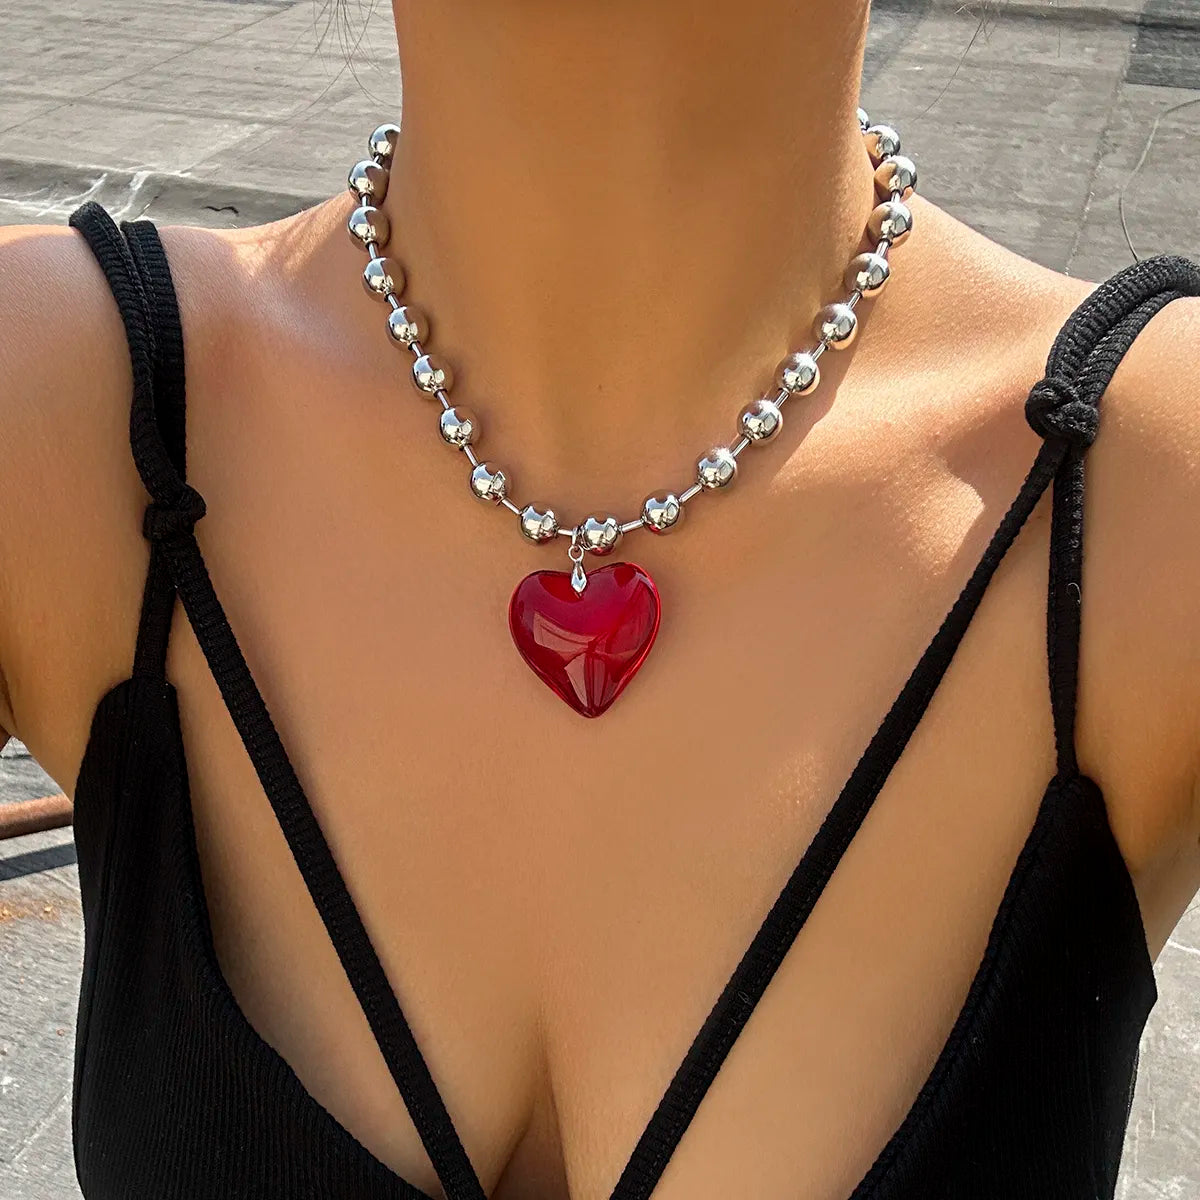 Big-Pearled Heart Necklace